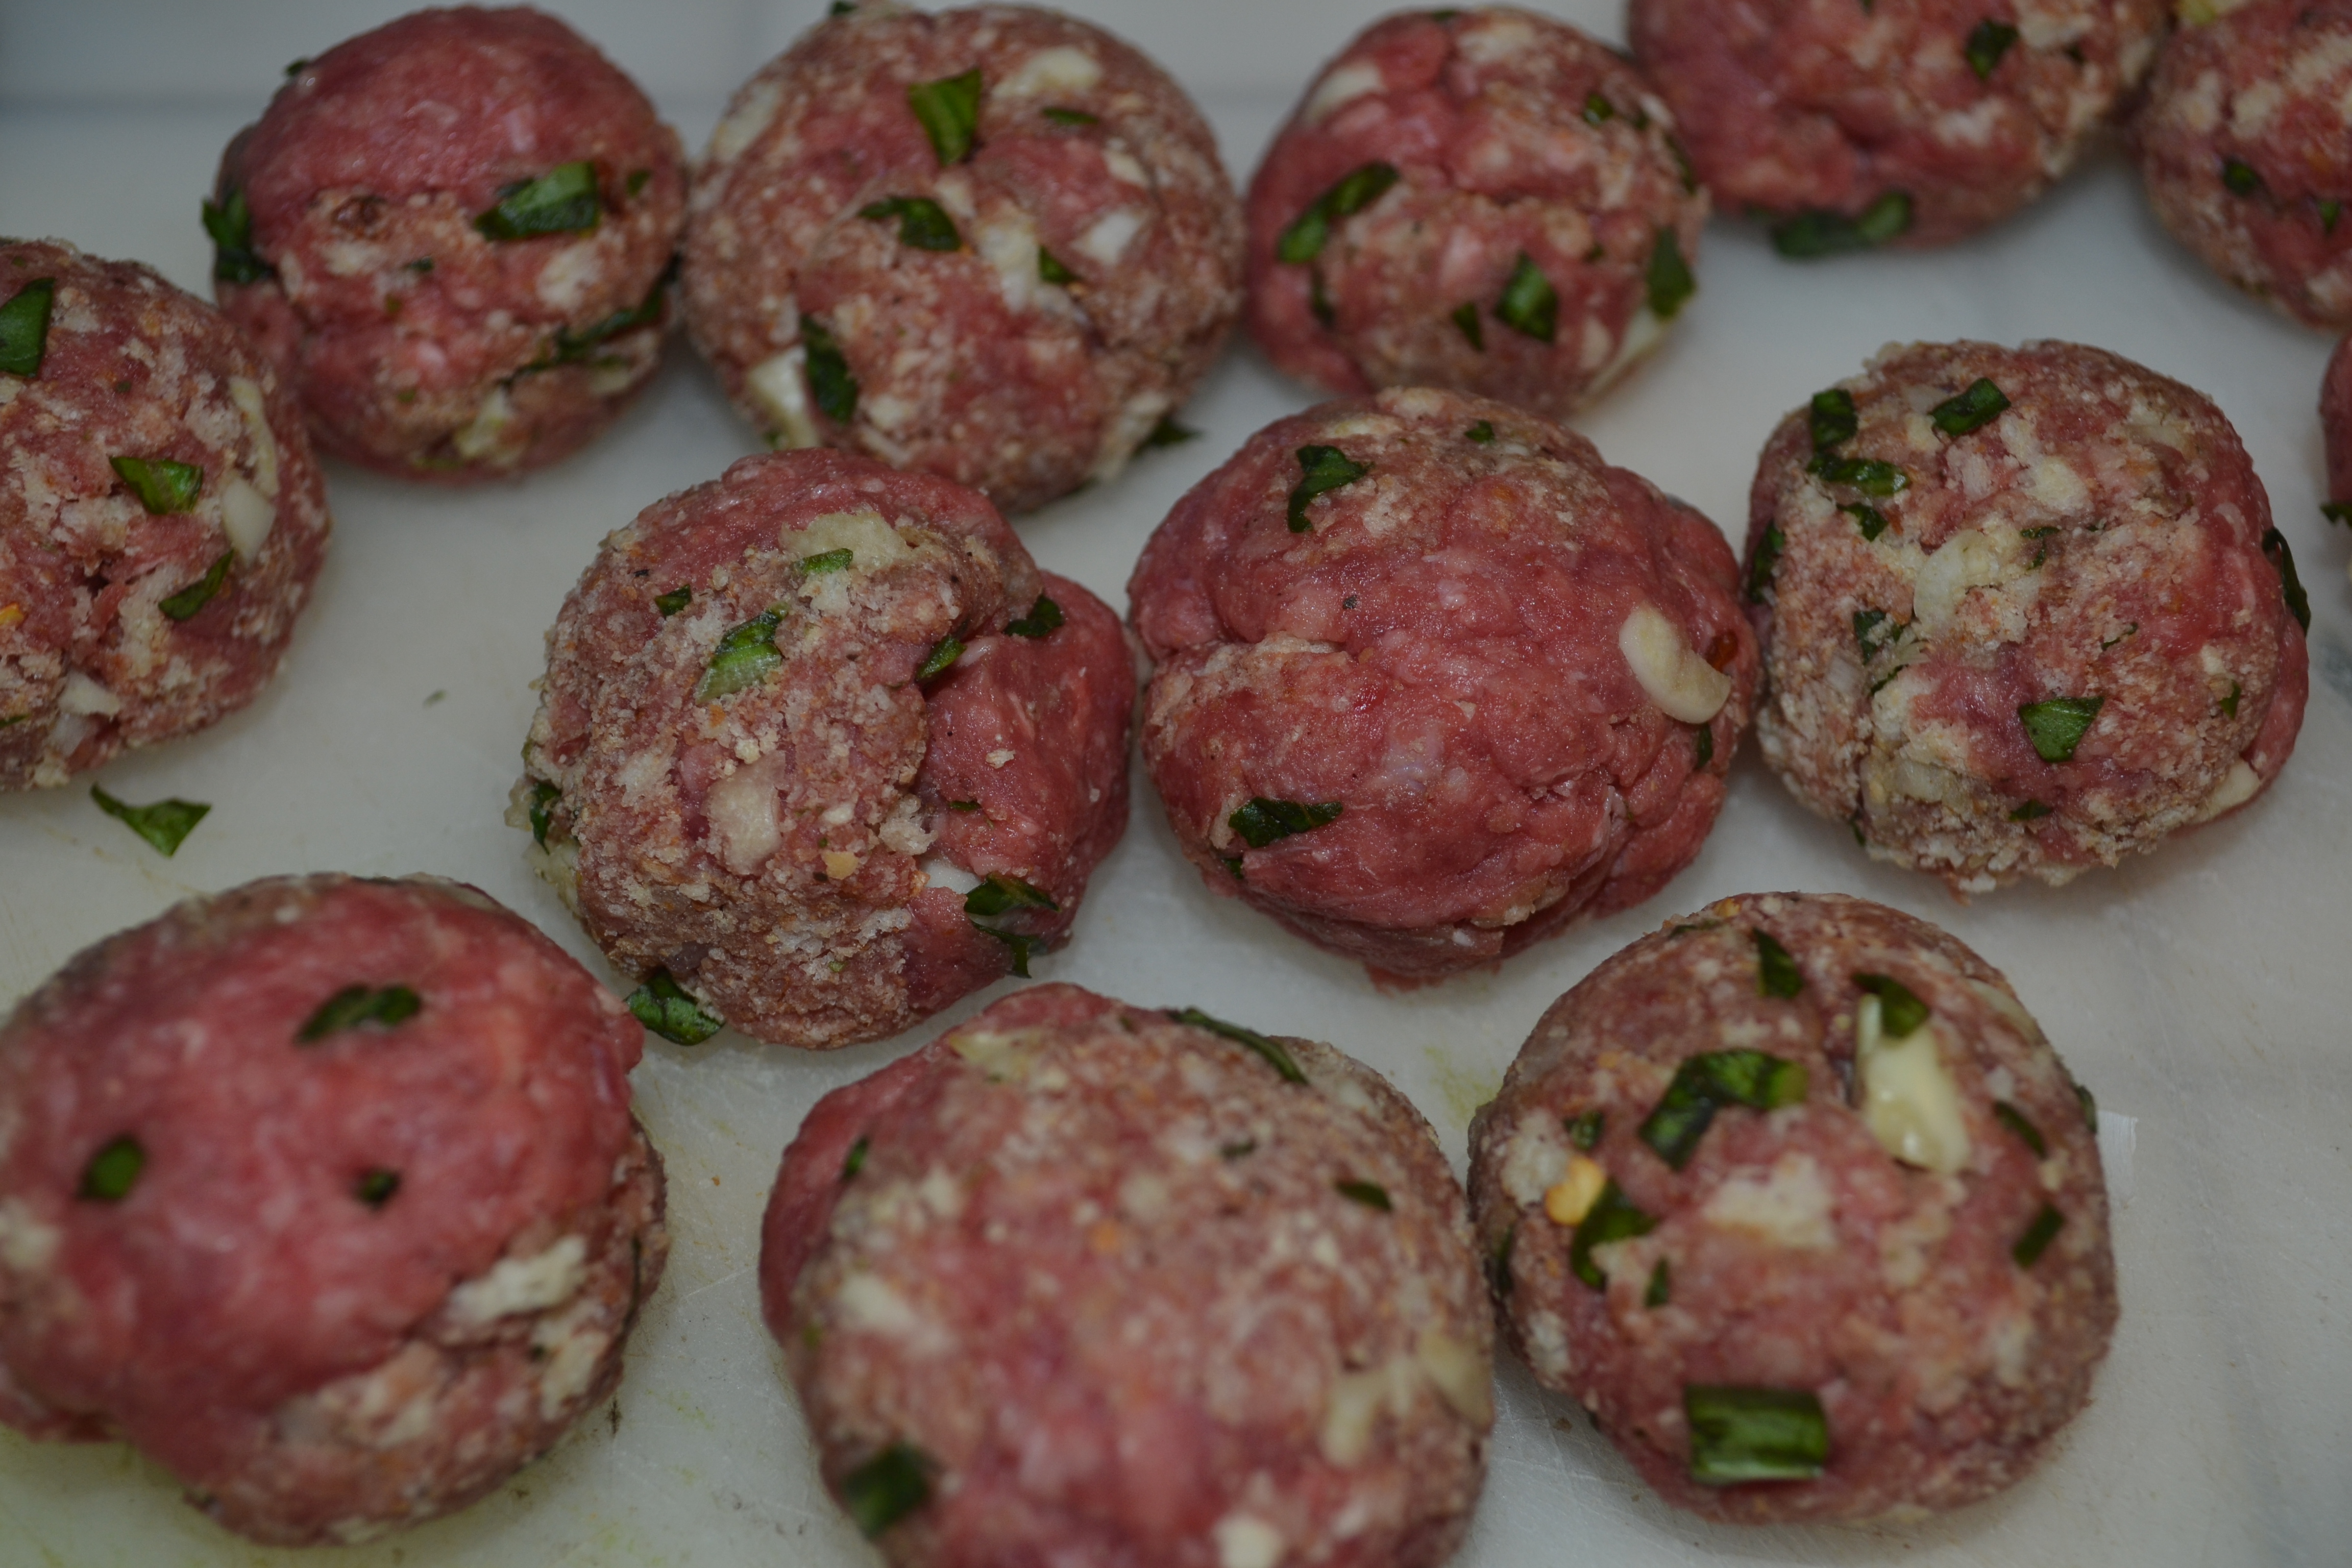 Meatballs formed and ready for the pan